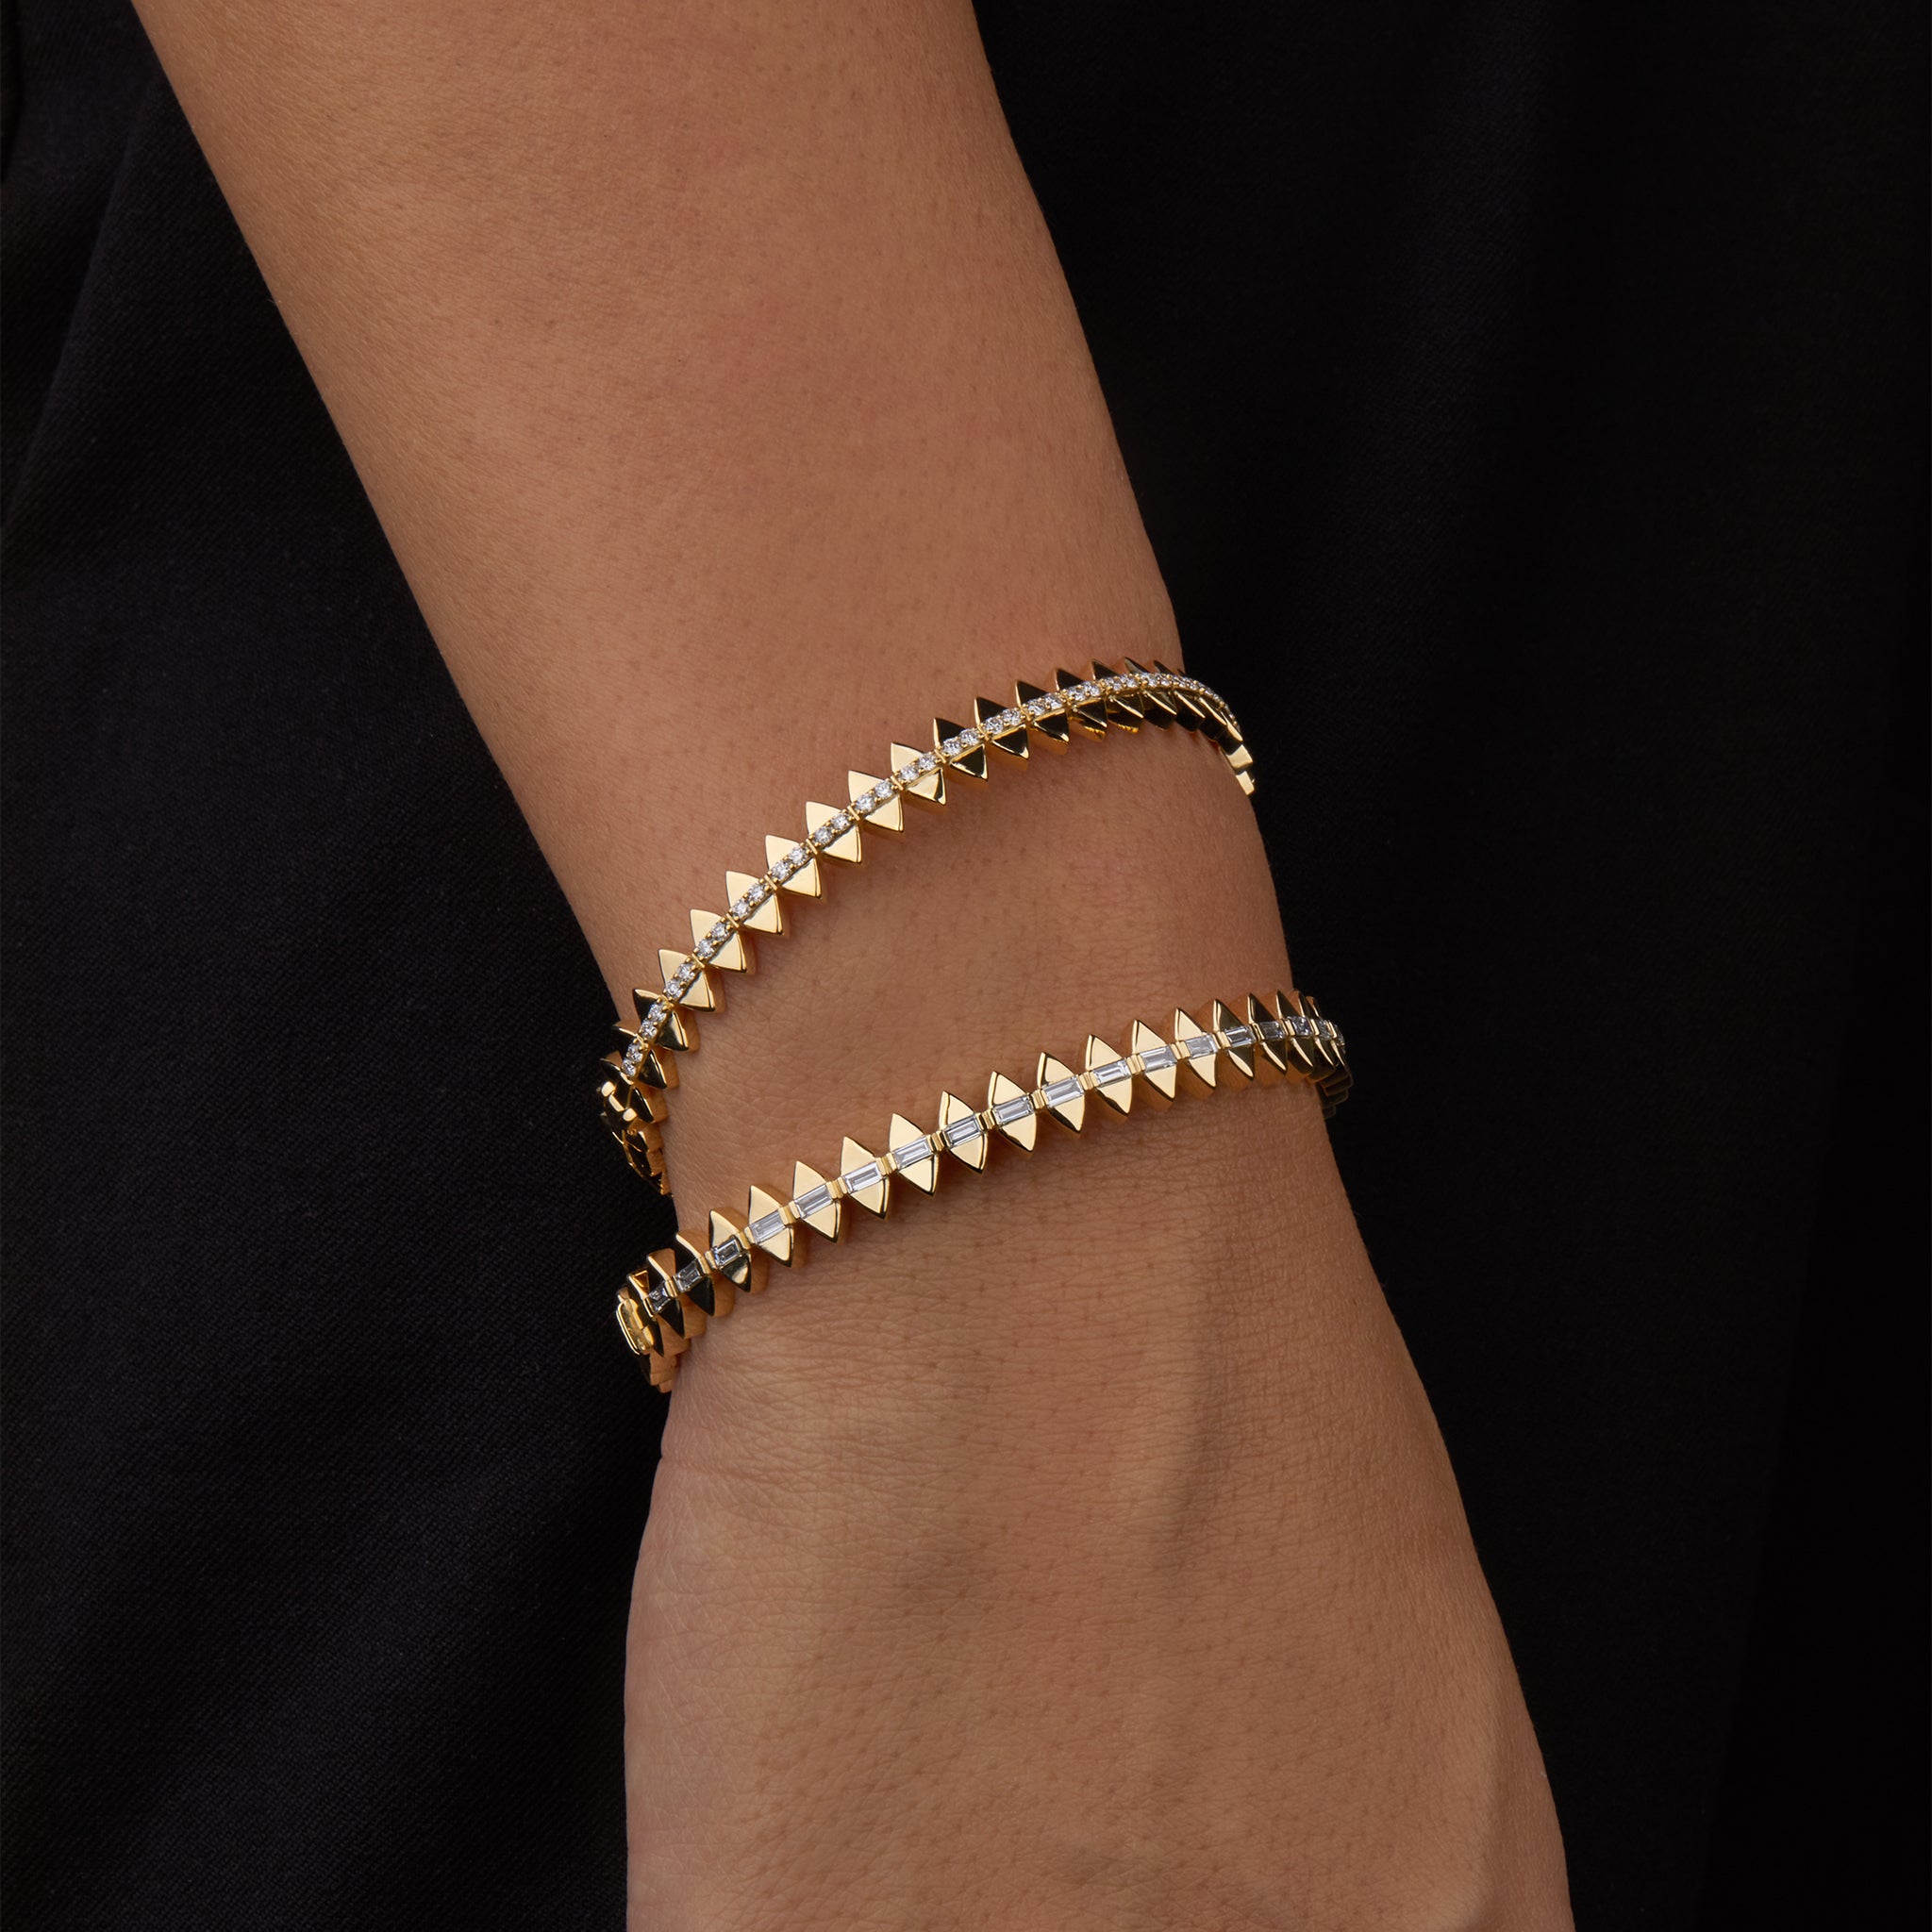 Two solidarity bangles portrayed on hand model.